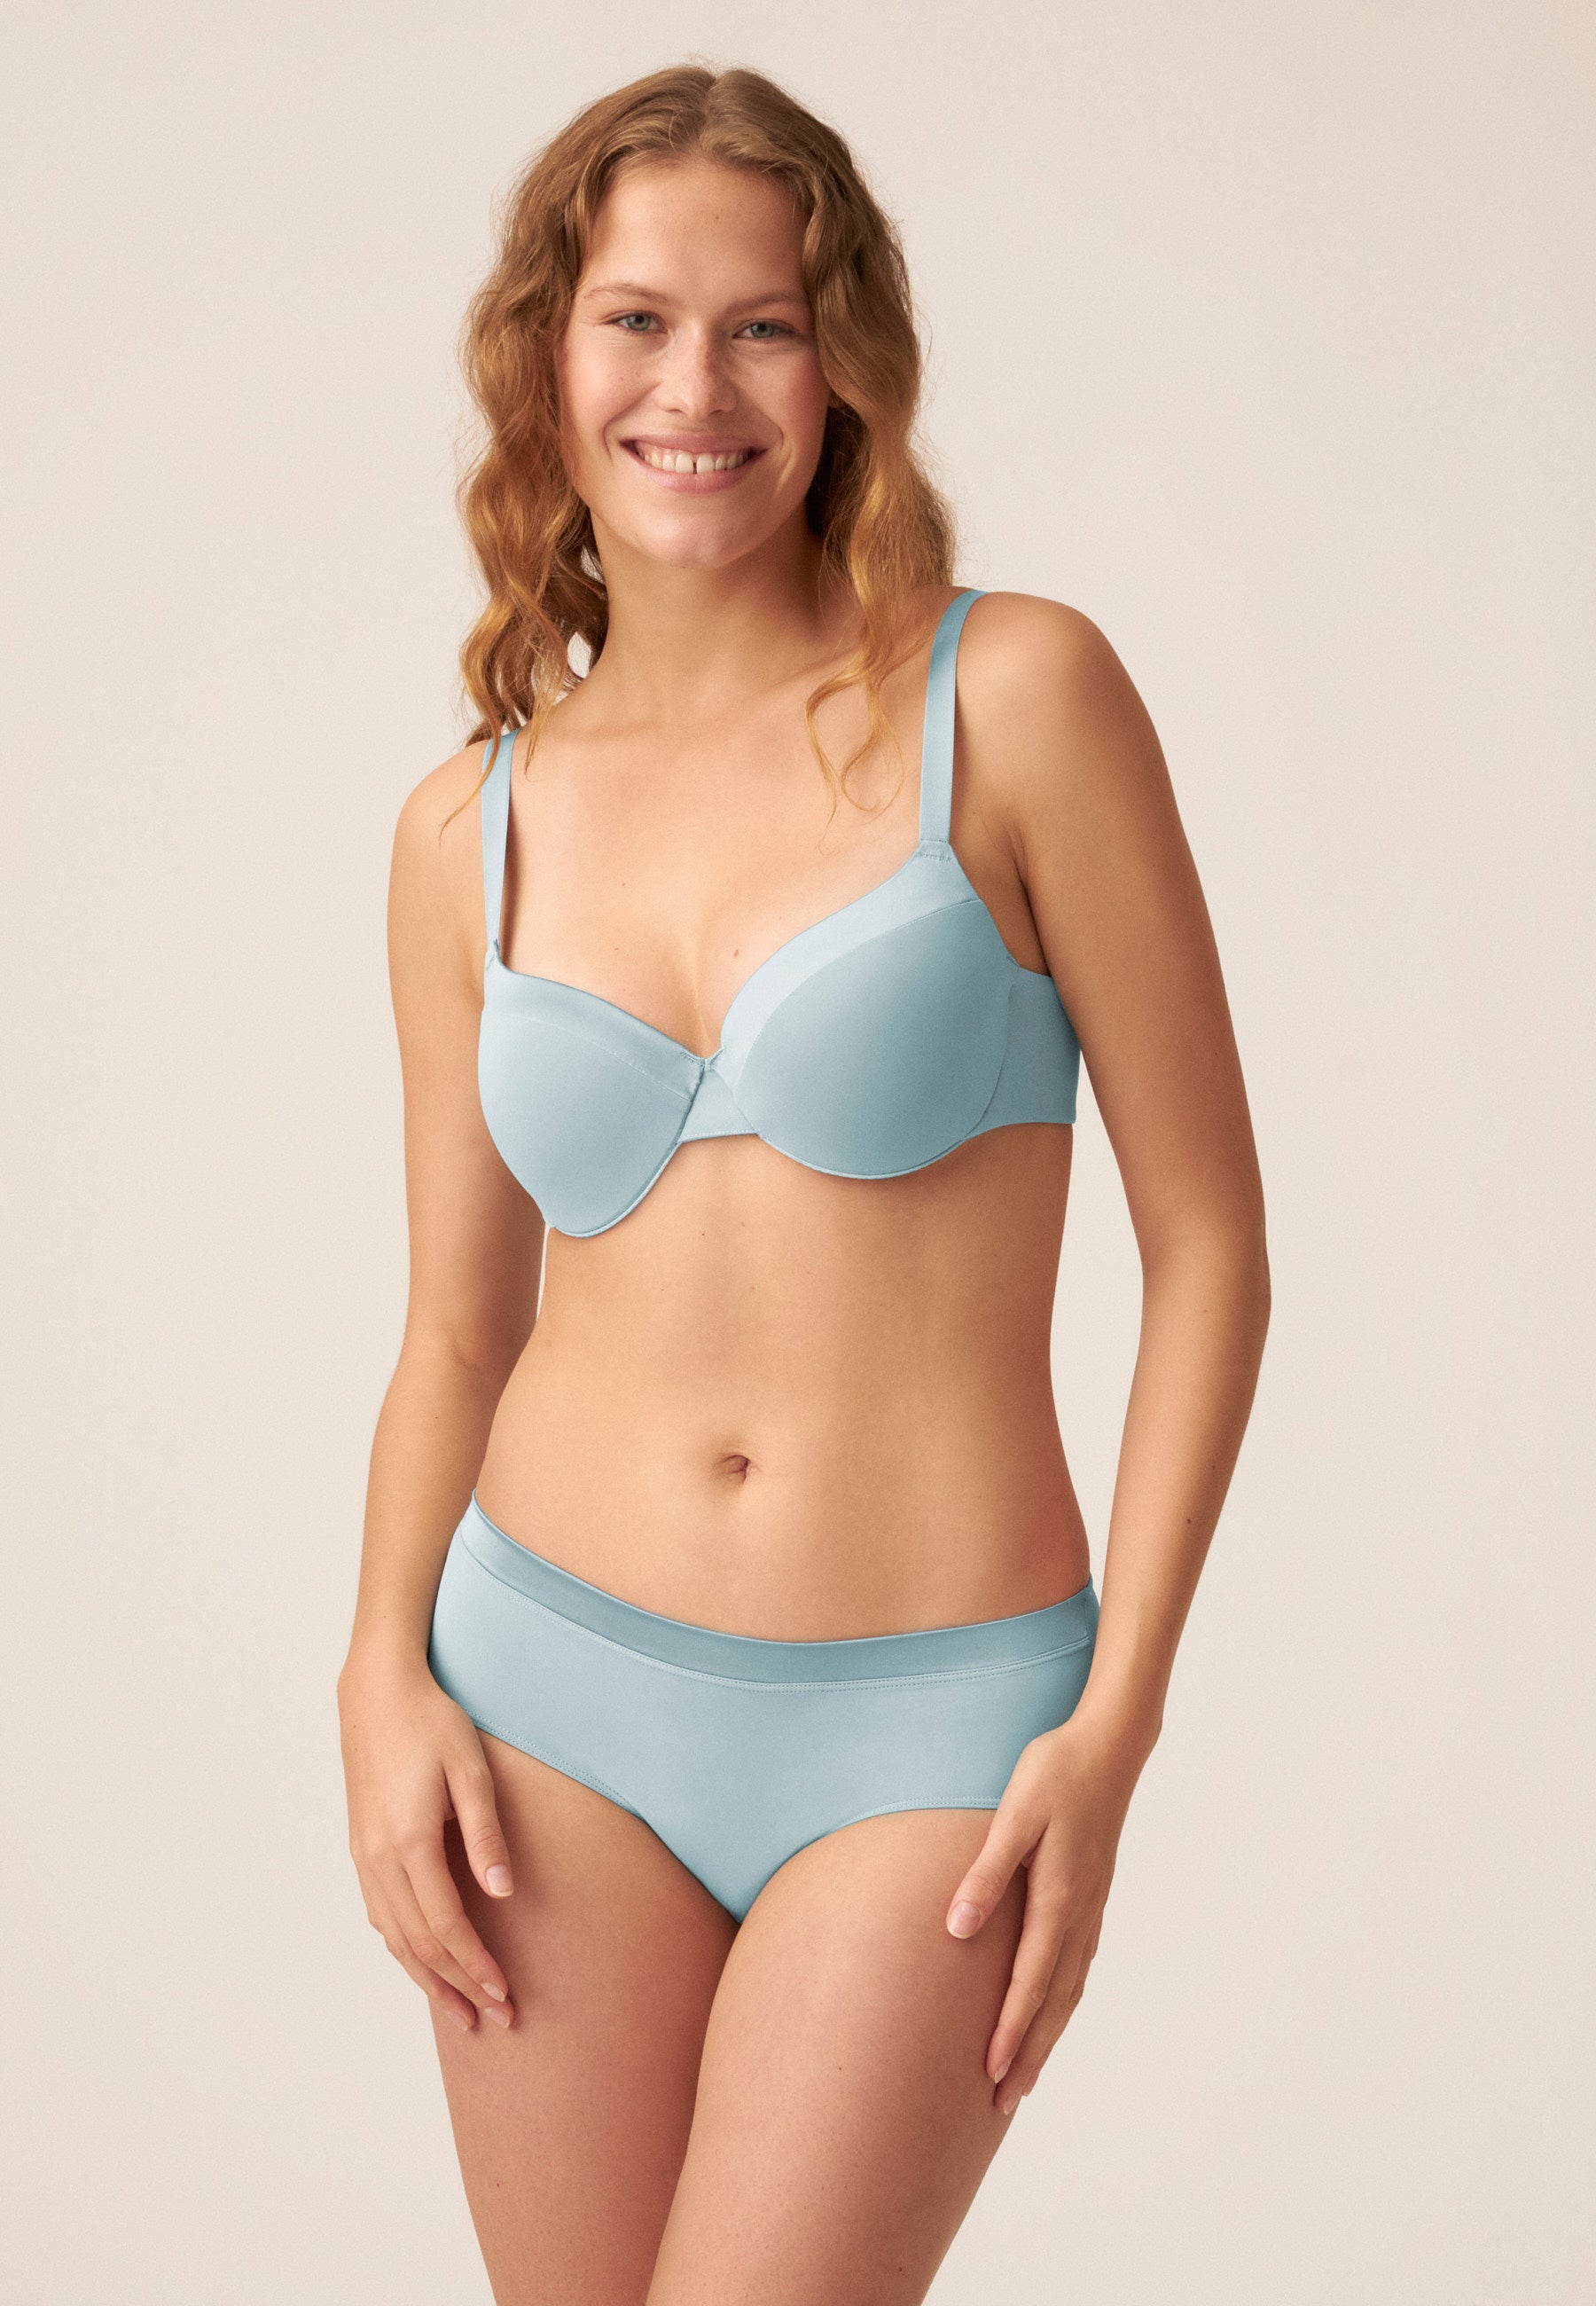 Underwired Bra with Shell - Matcha Sorbet